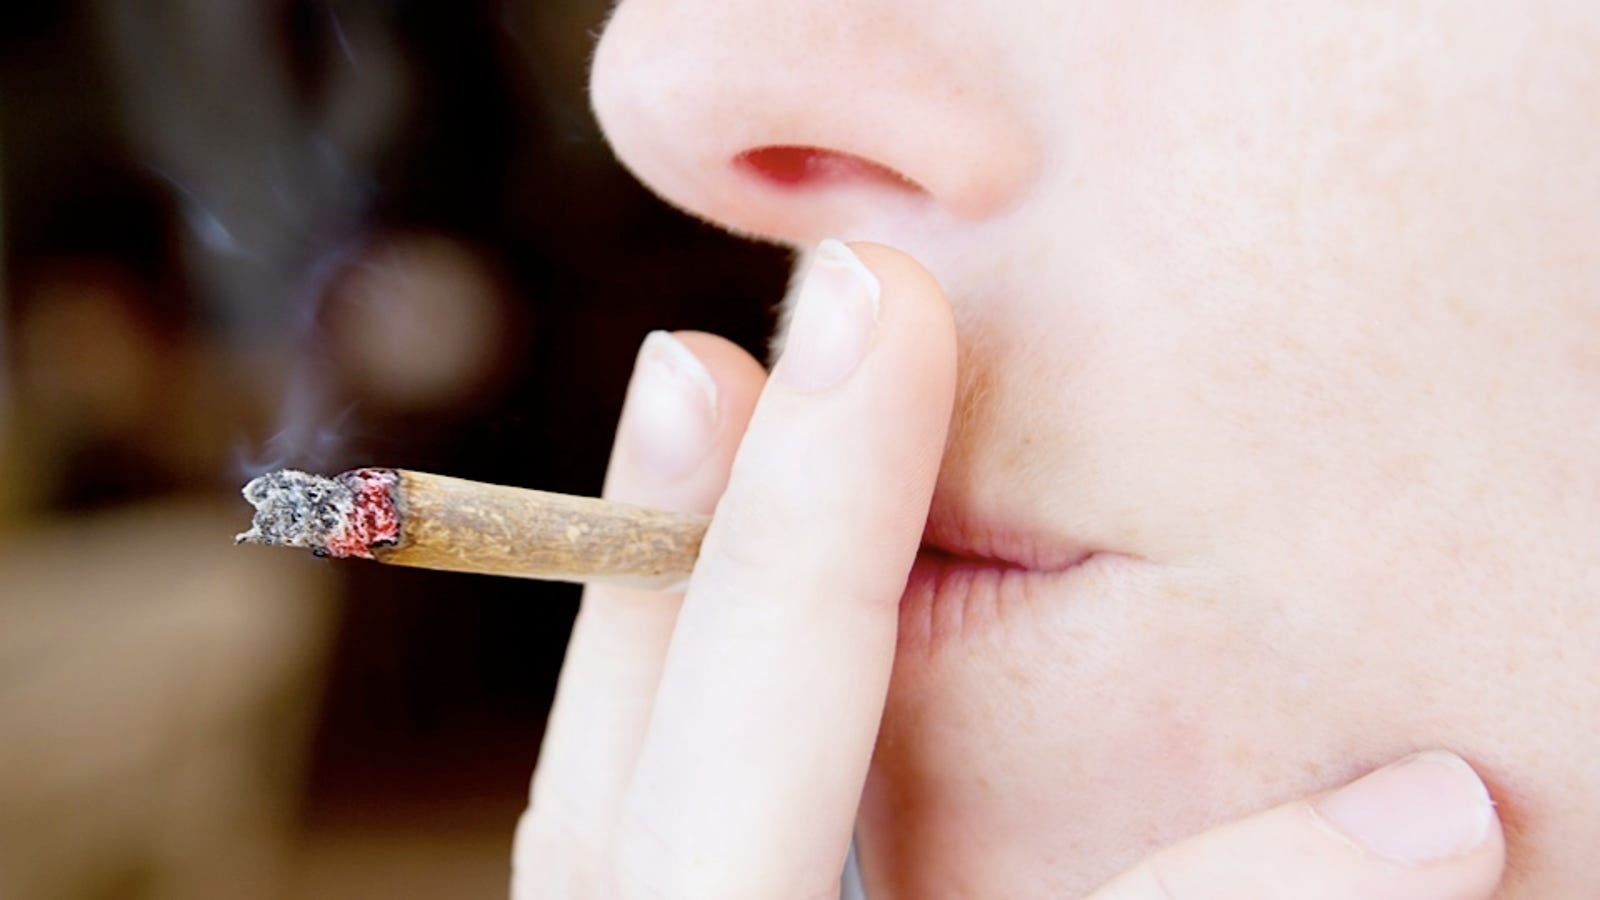 Science Confirms that Smoking Weed in High School Makes People Stupid